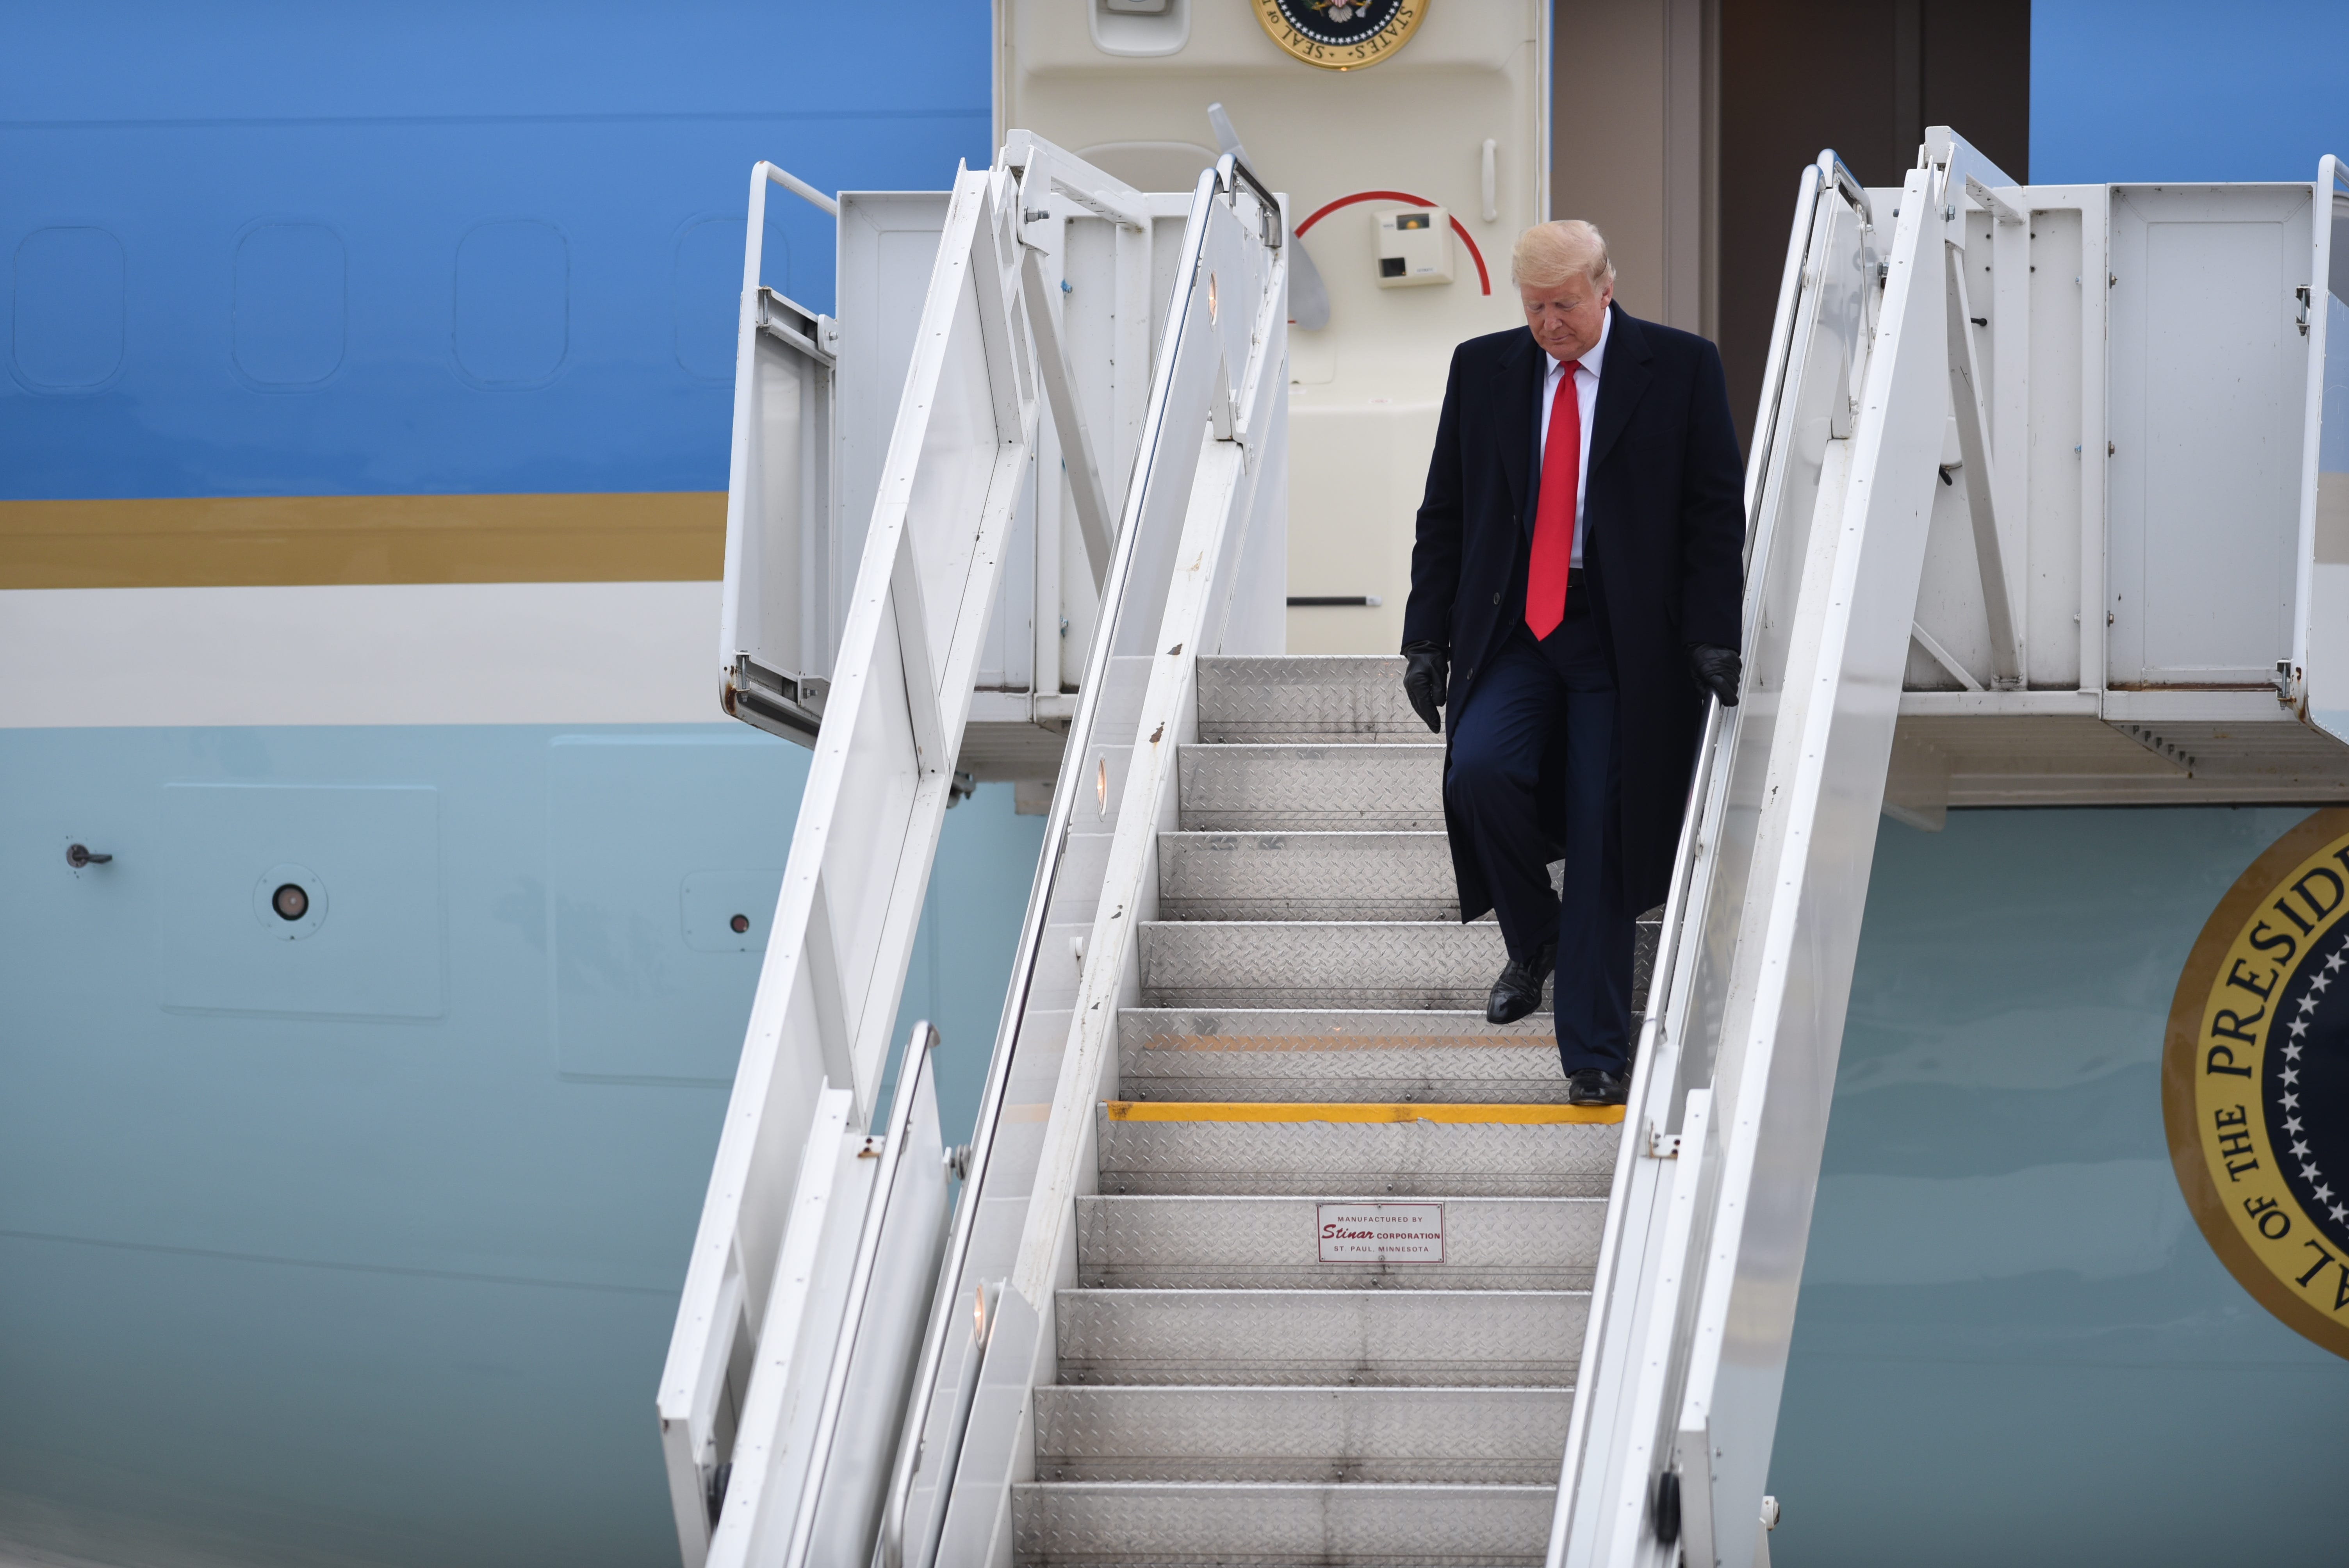 President Donald Trump arrives at Selfridge Air Base in Harrison Township, ahead of an appearance at Dana Inc., an auto supplier in Warren, on Jan. 30, 2020.